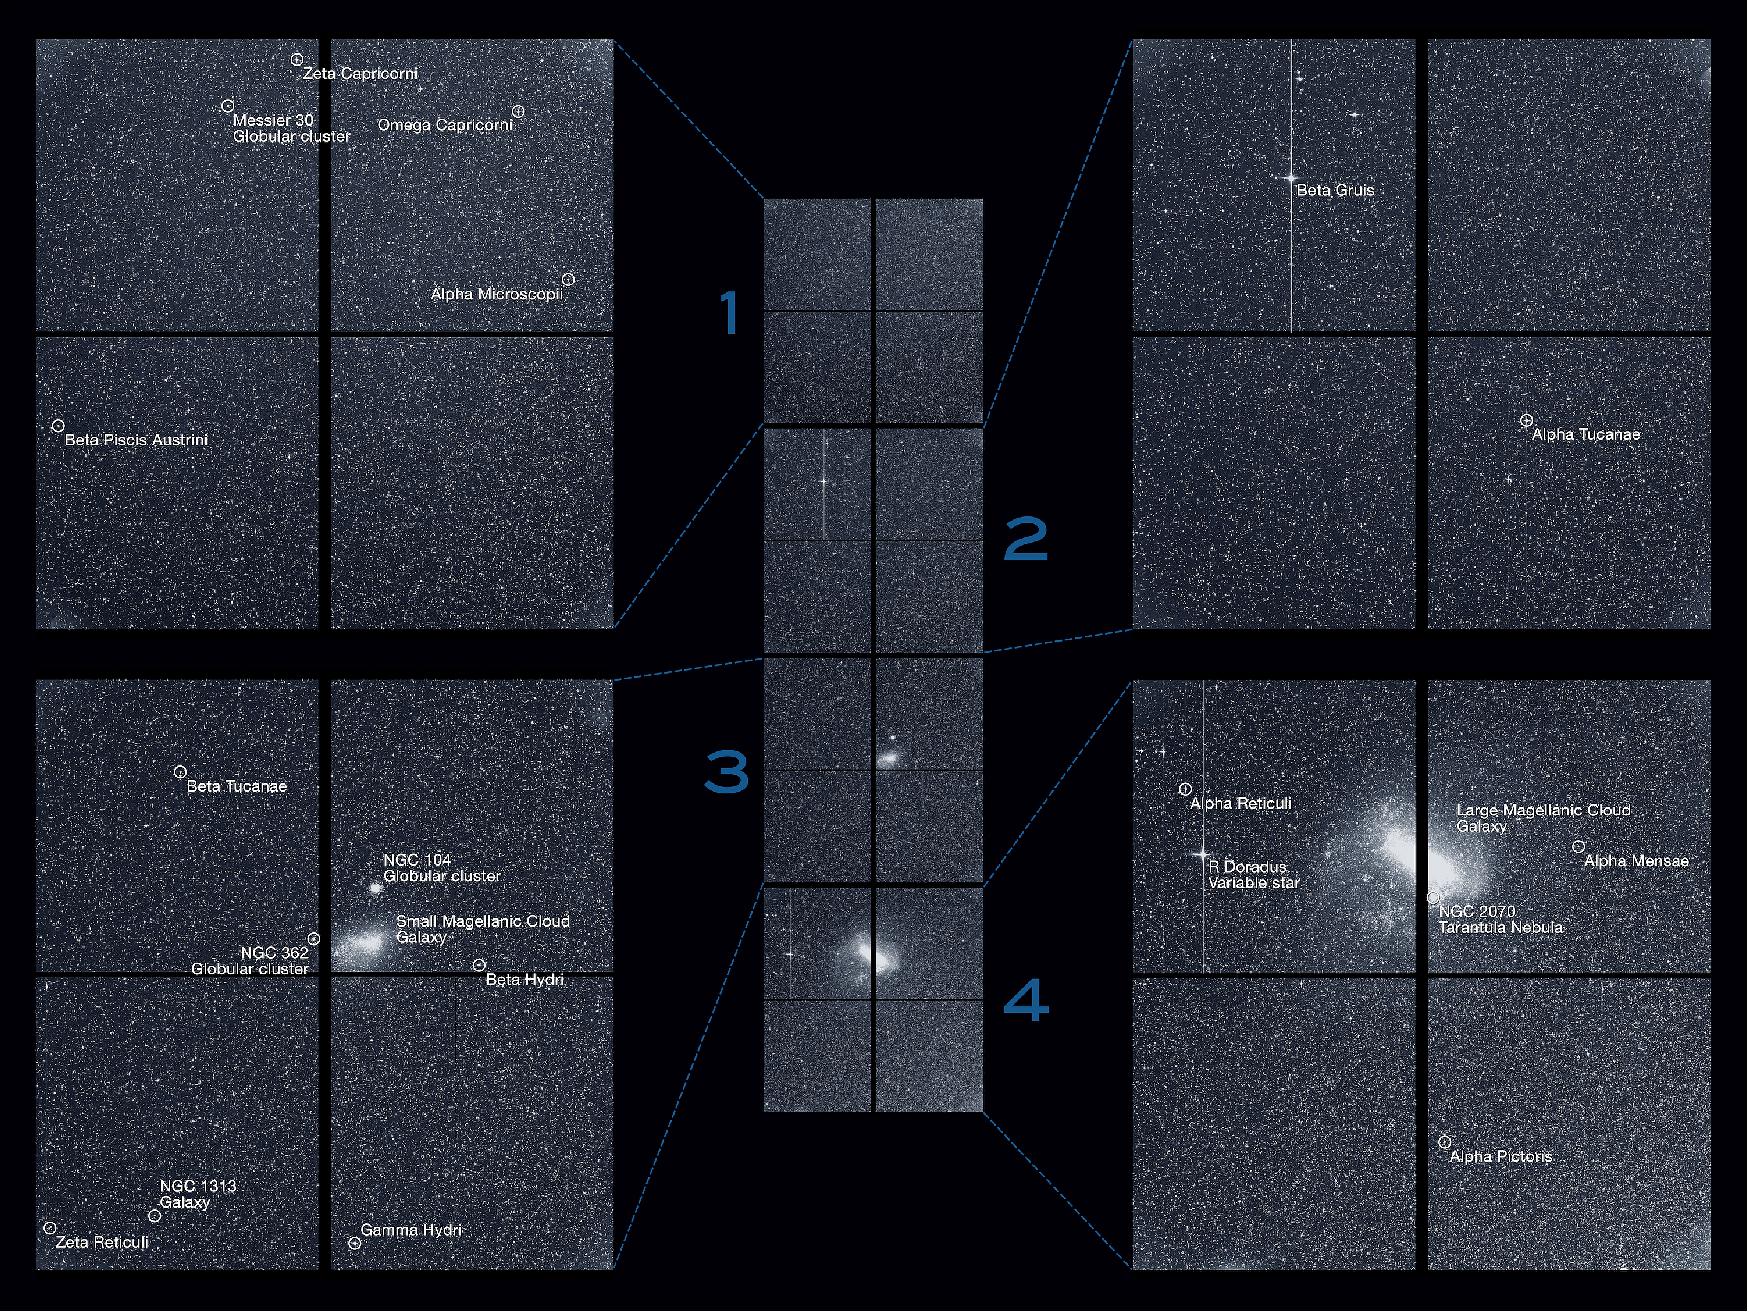 Figure 60: TESS captured this strip of stars and galaxies in the southern sky during one 30-minute period on 7 Aug. 2018. Created by combining the view from all four of its cameras, this is TESS’s “first light,” from the first observing sector that will be used for identifying planets around other stars. Notable features in this swath of the southern sky include the Large and Small Magellanic Clouds and a globular cluster called NGC 104, also known as 47 Tucanae. The brightest stars in the image, Beta Gruis and R Doradus, saturated an entire column of camera detector pixels on the satellite’s second and fourth cameras (image credit: NASA/MIT/TESS)